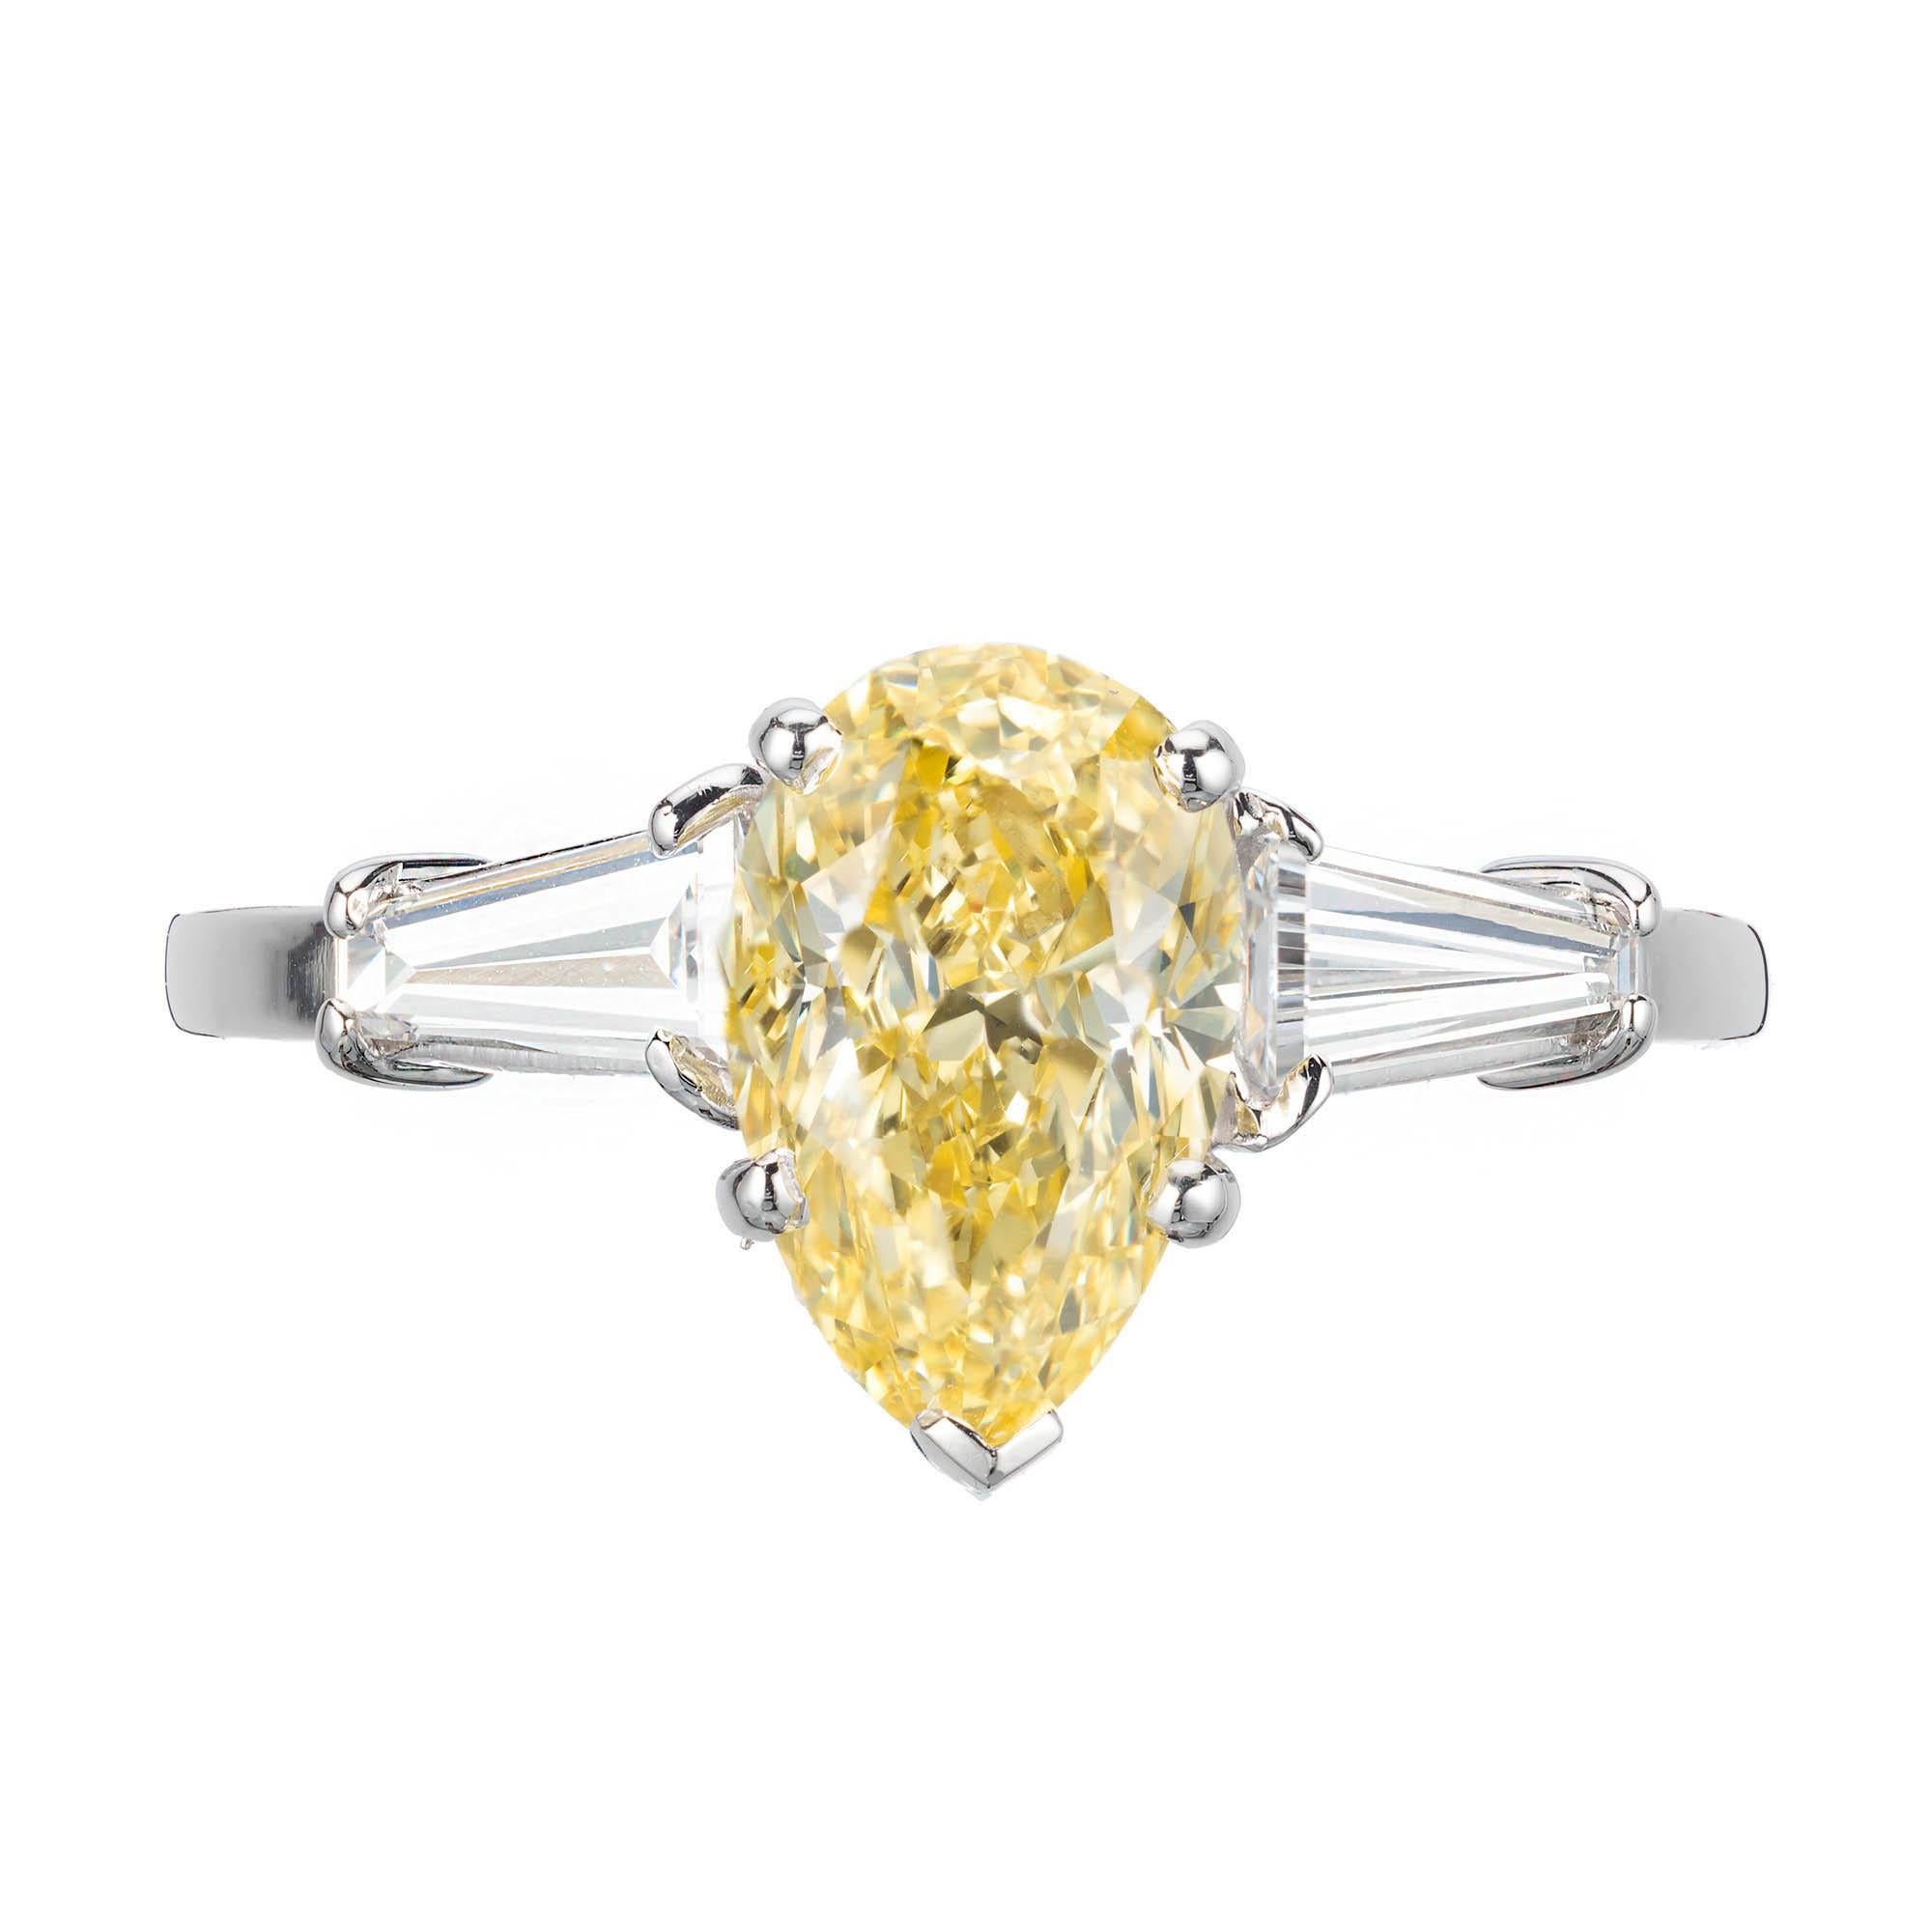 Vintage 1960s pear shape fancy intense yellow 1.54 carat diamond three-stone engagement ring. GIA certified center stone, very strong fancy intense color, accented with two baguette side diamonds in a platinum setting.

1 pear shape fancy intense